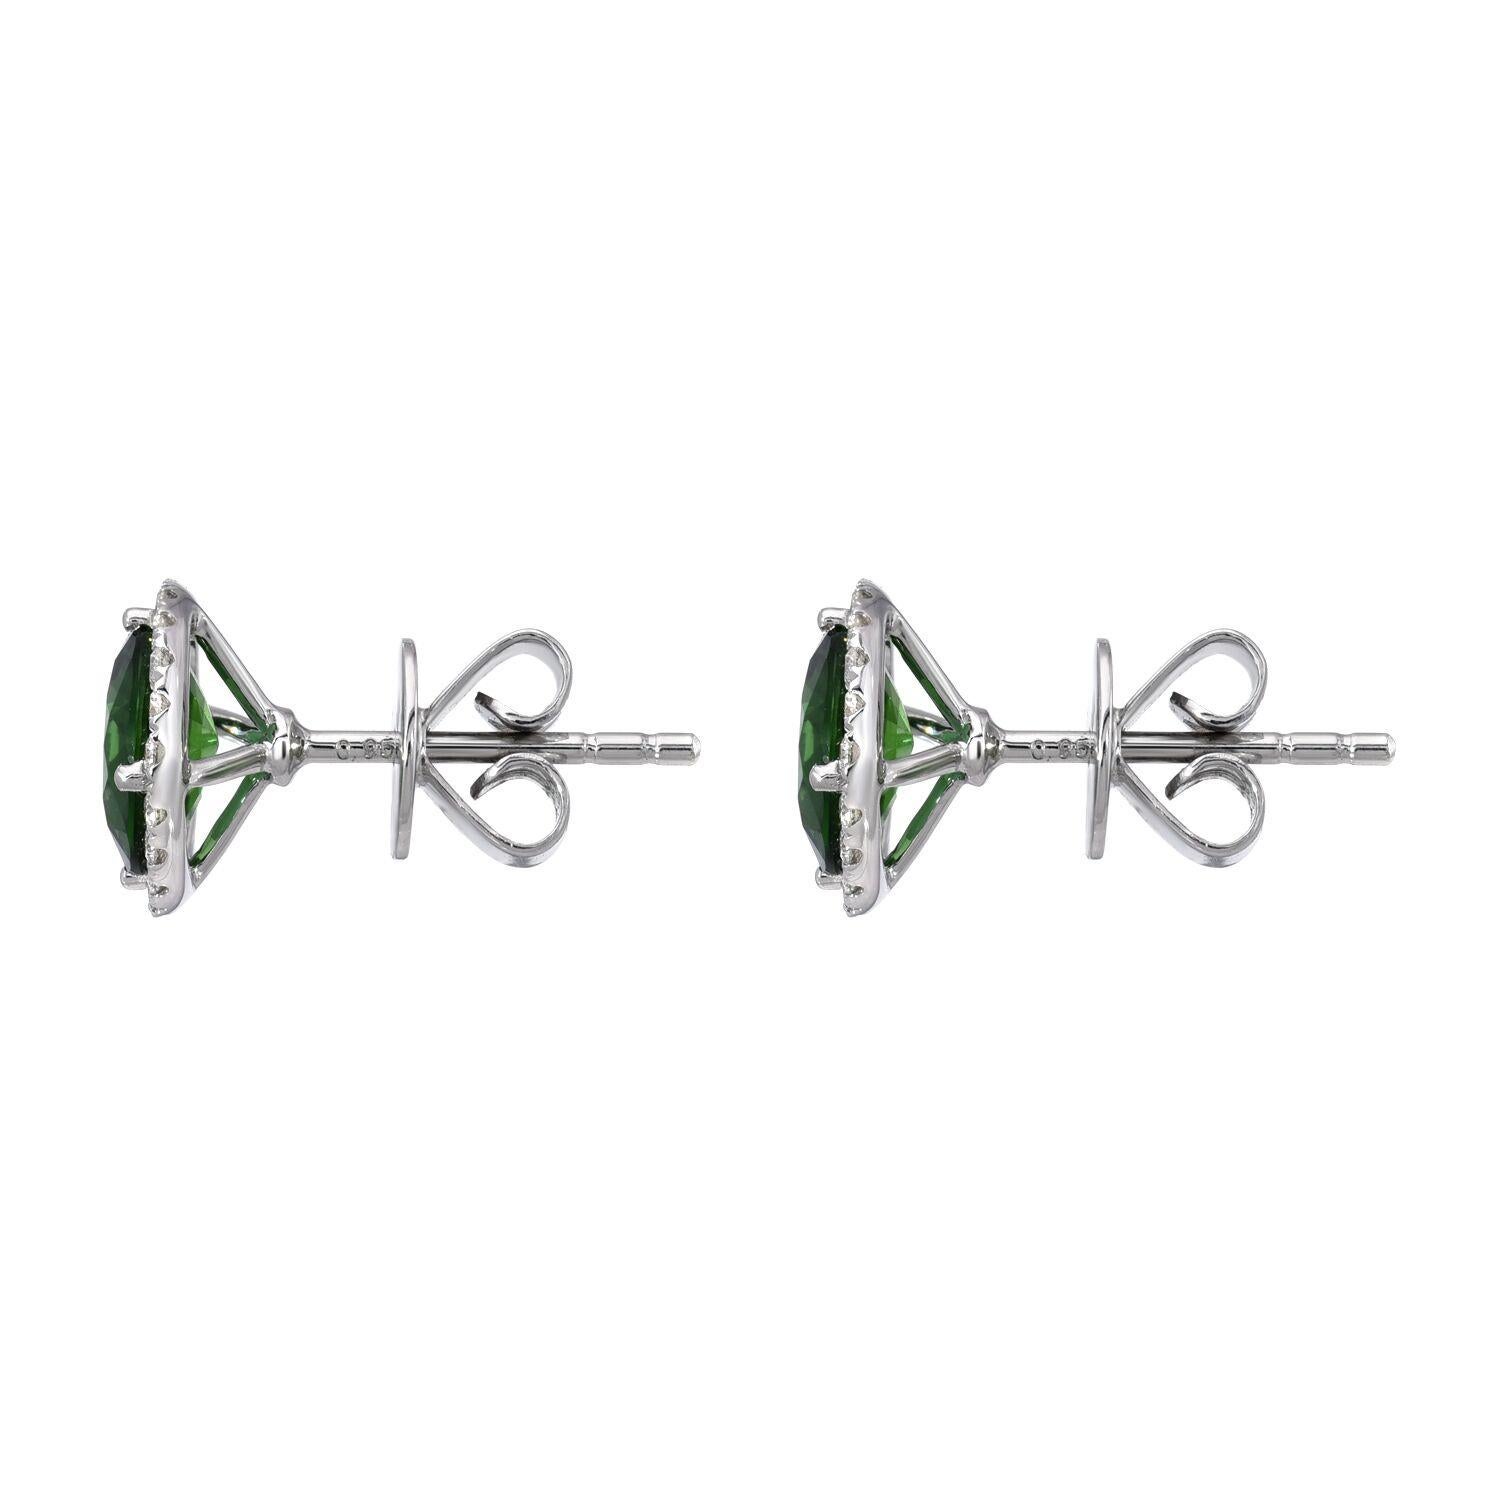 A pair of deep Chrome Green Tourmaline rounds, weighing a total of 
1.96 carats, are surrounded by a a halo of round brilliant diamonds weighing a total of 0.25 carats, in these 18K white gold stud earrings for women.
Returns are accepted and paid